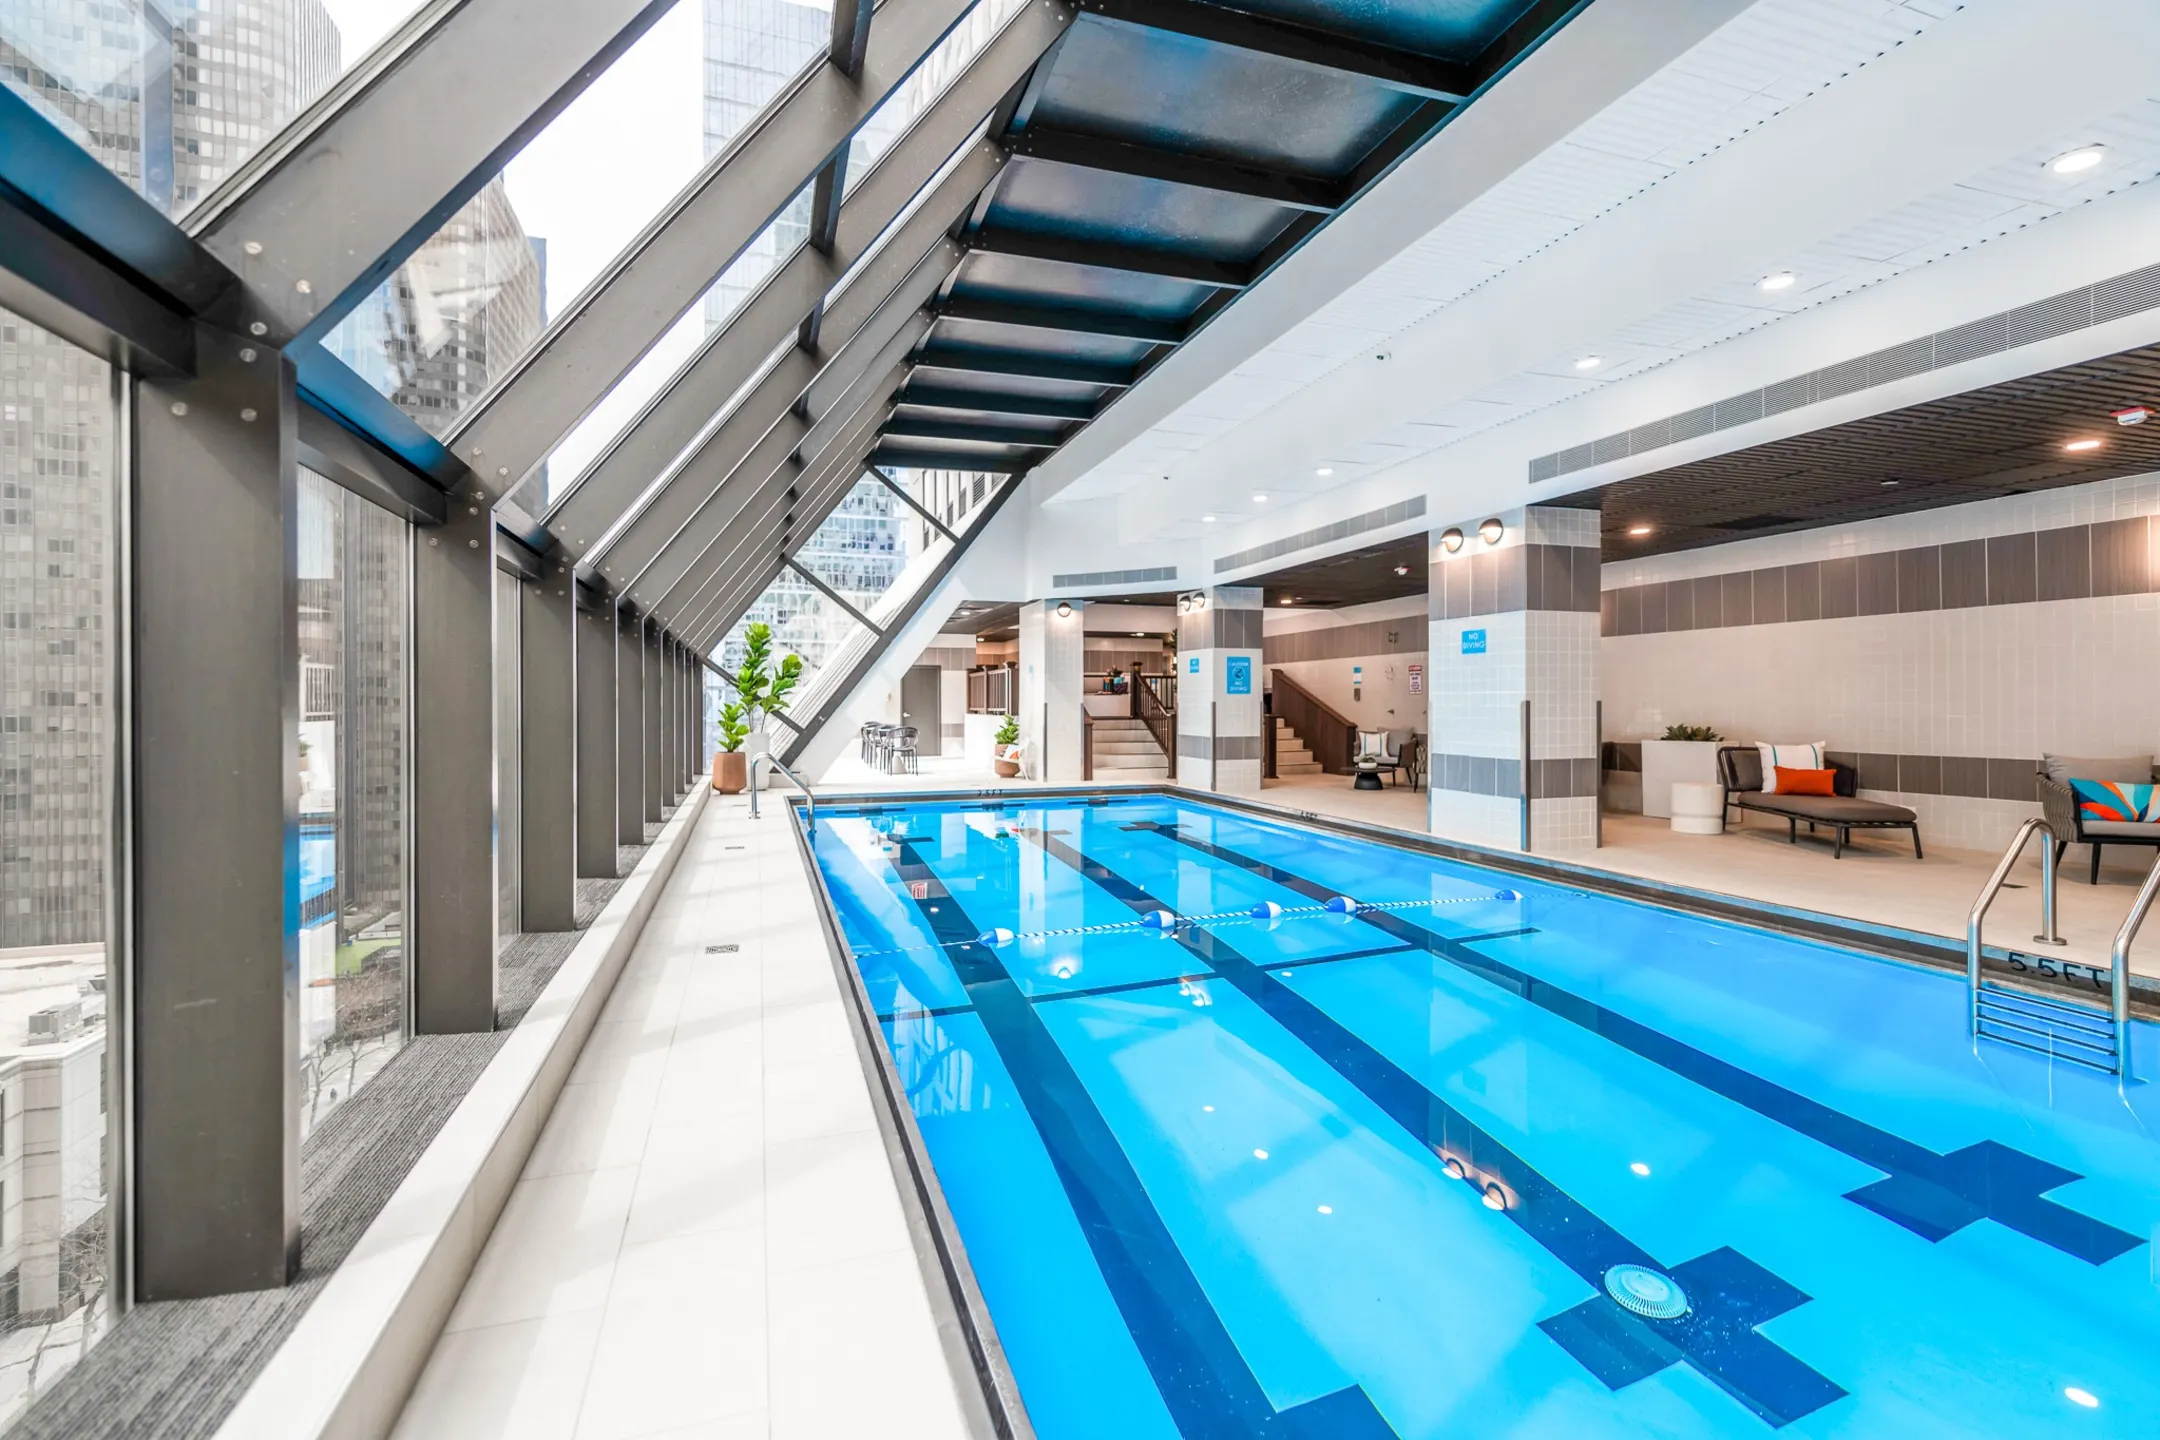 Pool - Axis Apartments and Lofts - Chicago, IL